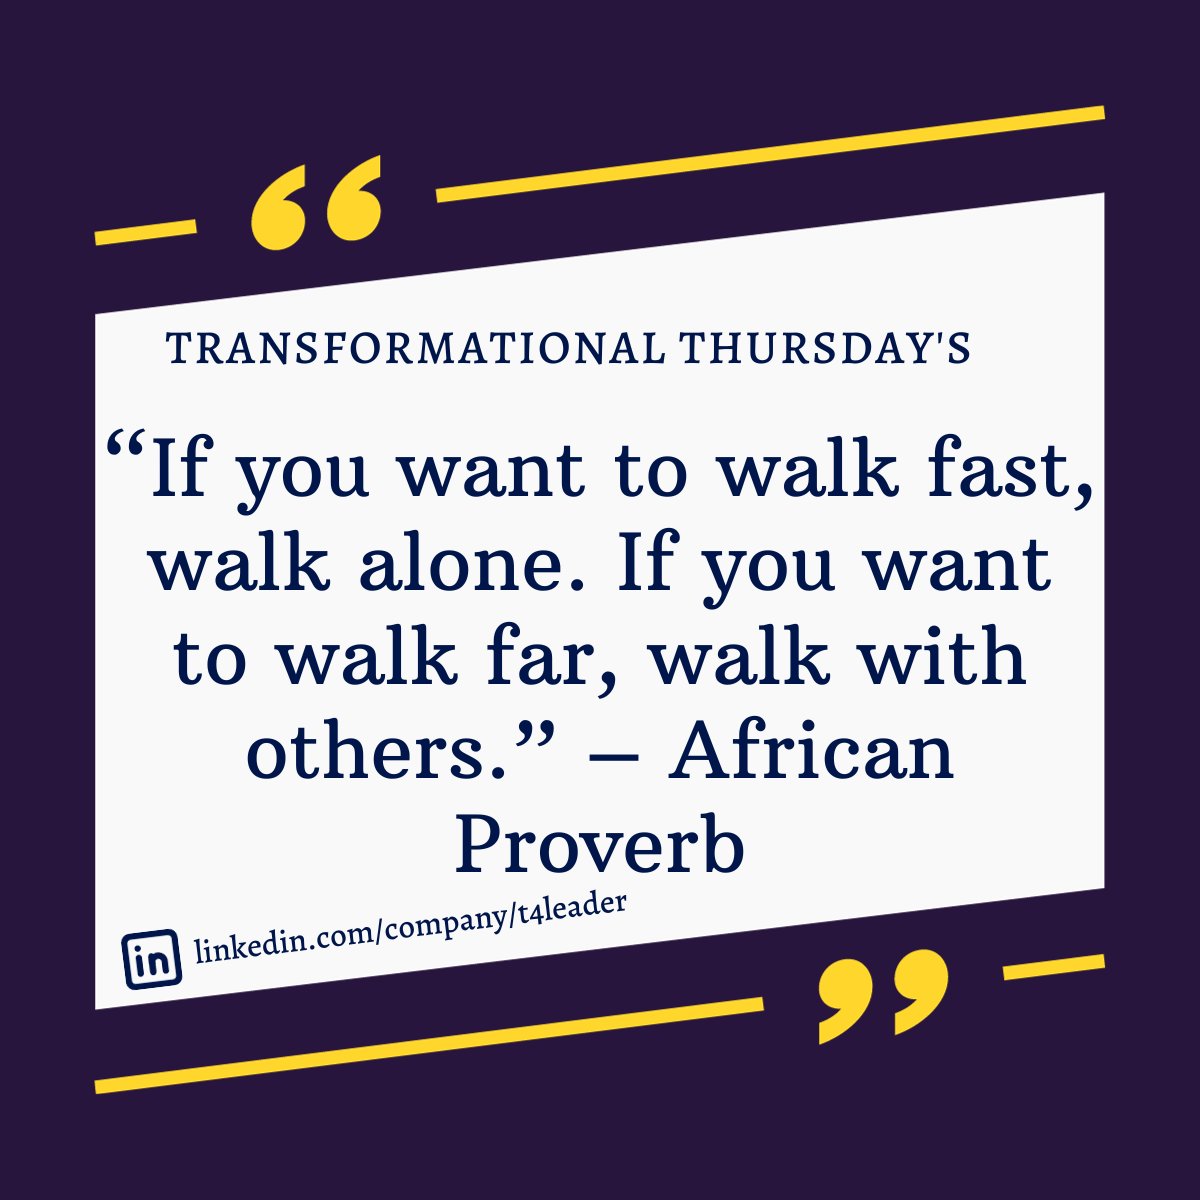 🌟 Take a step towards transformation this #TransformationalThursday with @T4Leaders! 🚶‍♂️🚶‍♀️
 'If you want to walk fast, walk alone. If you want to walk far, walk with others.' - African Proverb 🚀
 Learn more at t4leader.com.

#ThursdayMotivation #leadership #TestBuds…